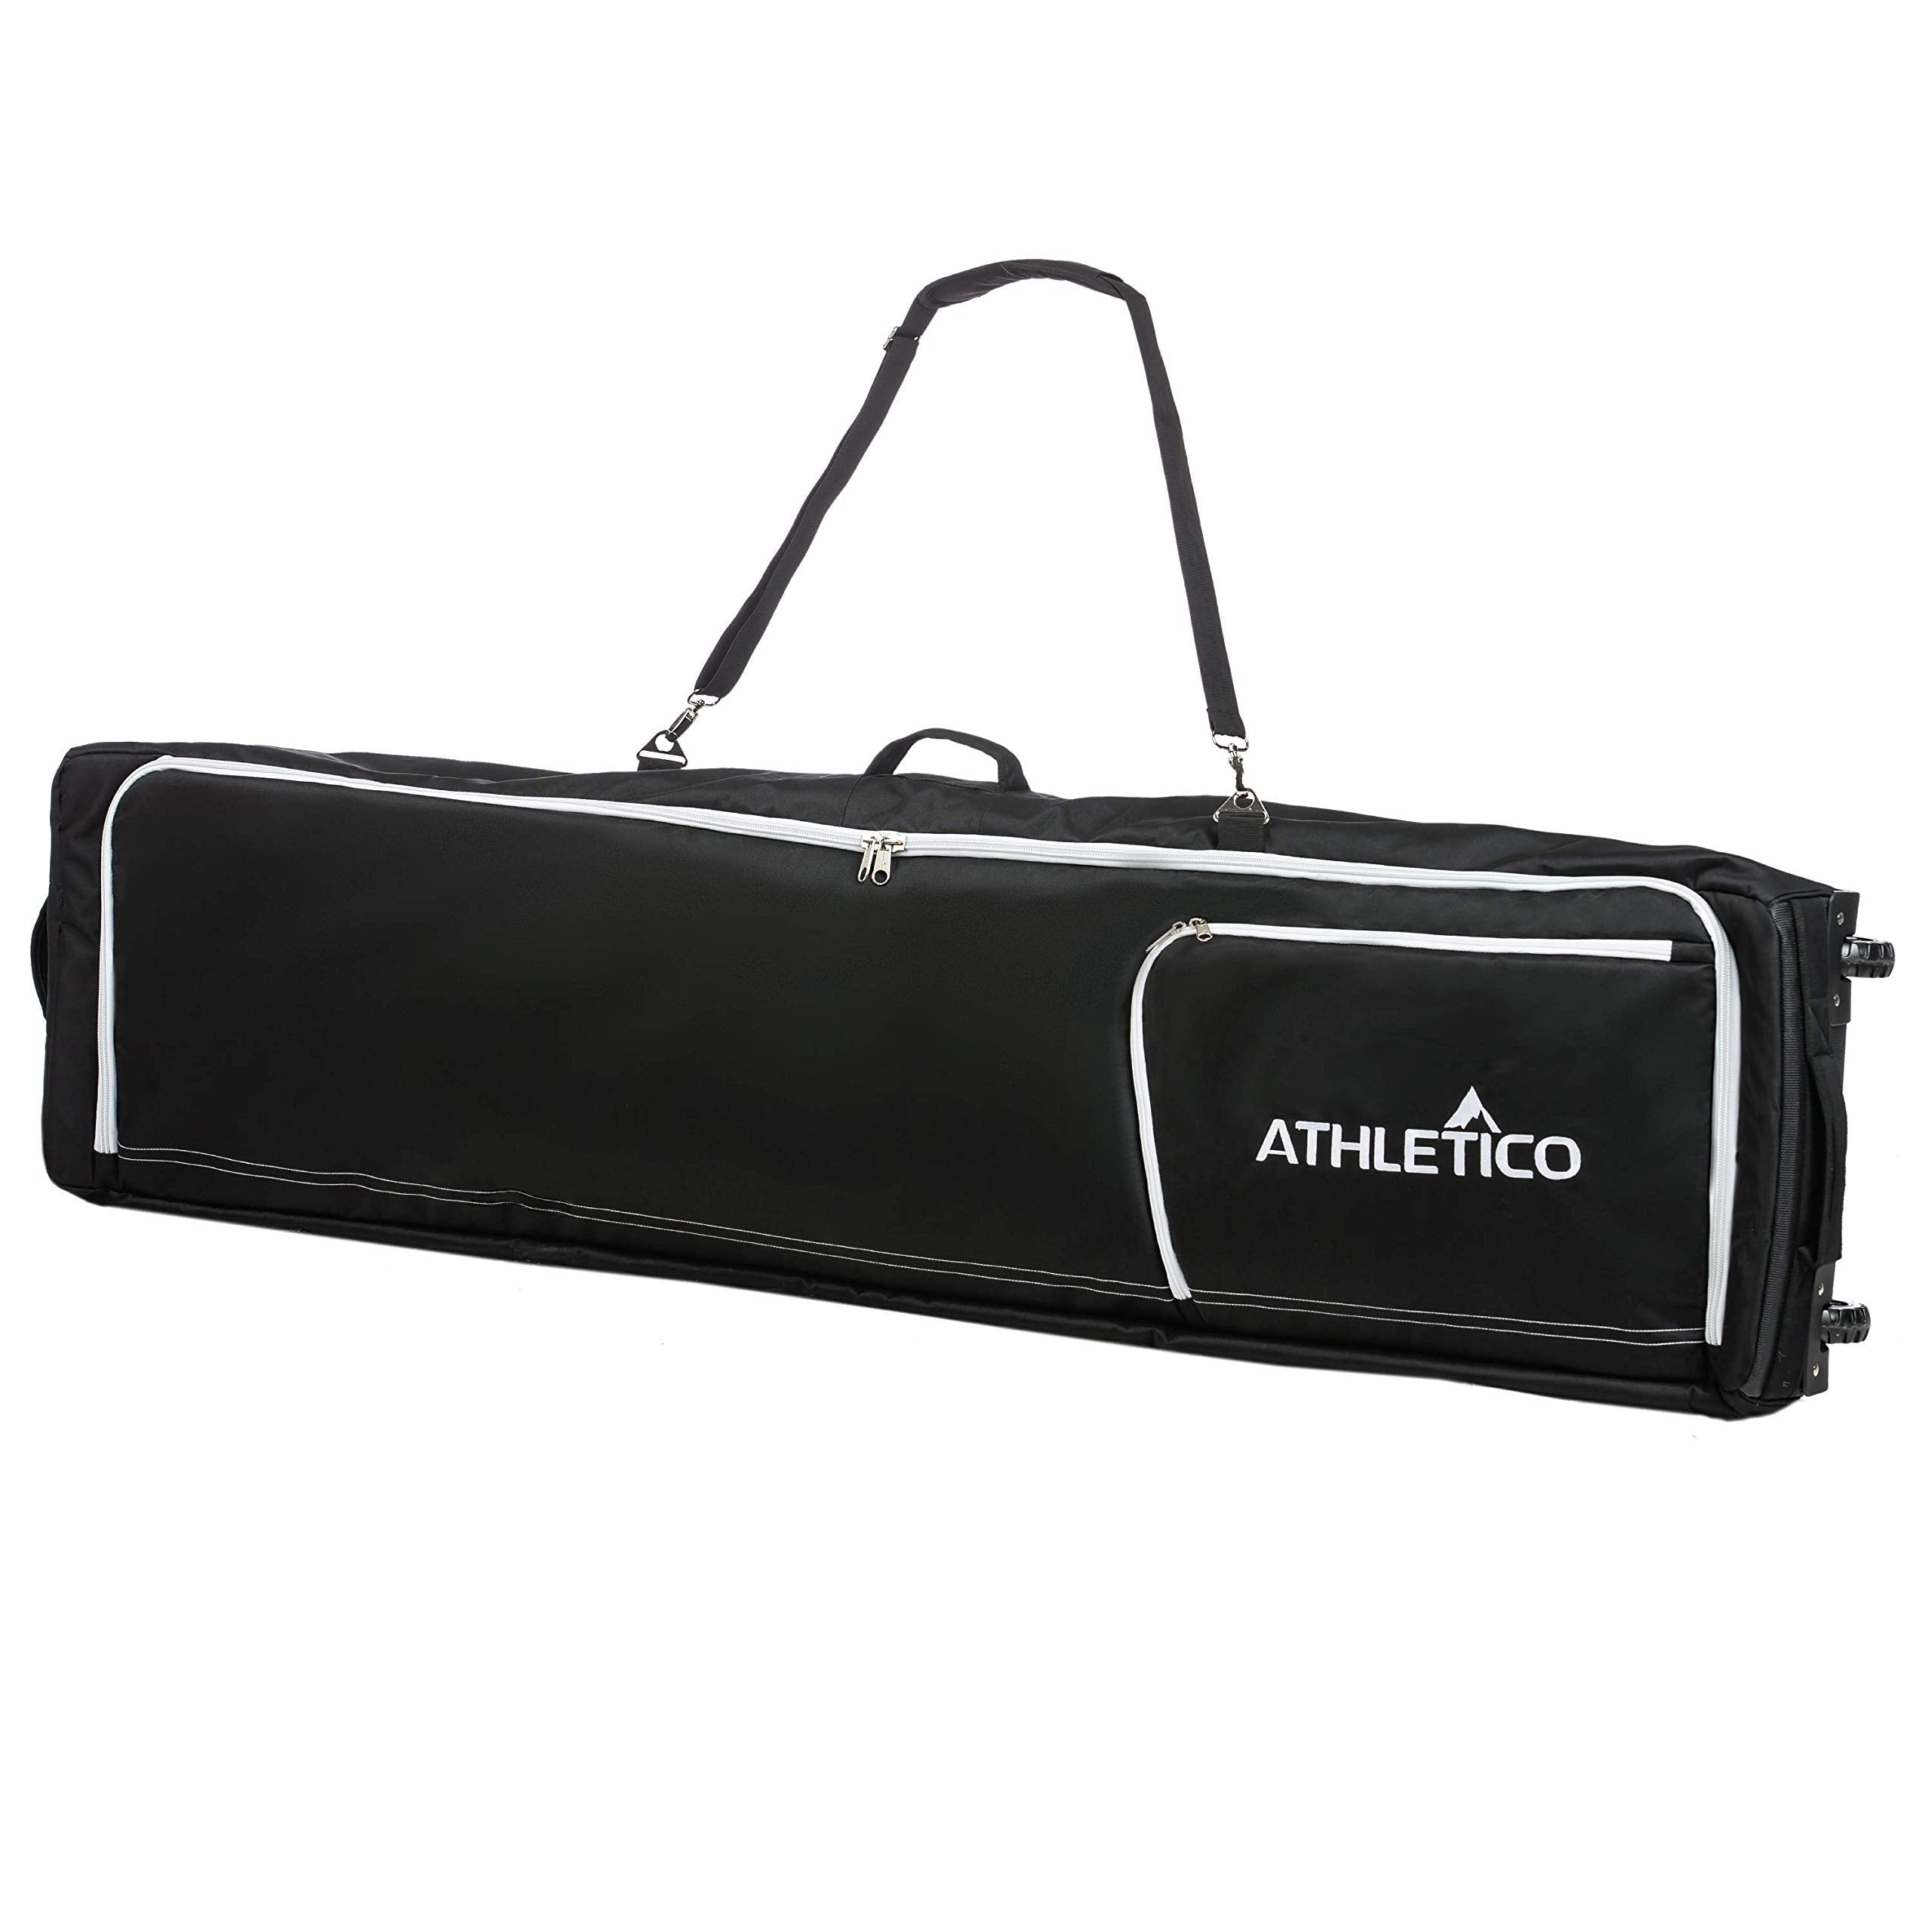 Athletico Conquest Padded Snowboard Bag With Wheels - Travel Bag for Single Snowboard and Snowboard Boots (Black, 175 cm)  - Very Good